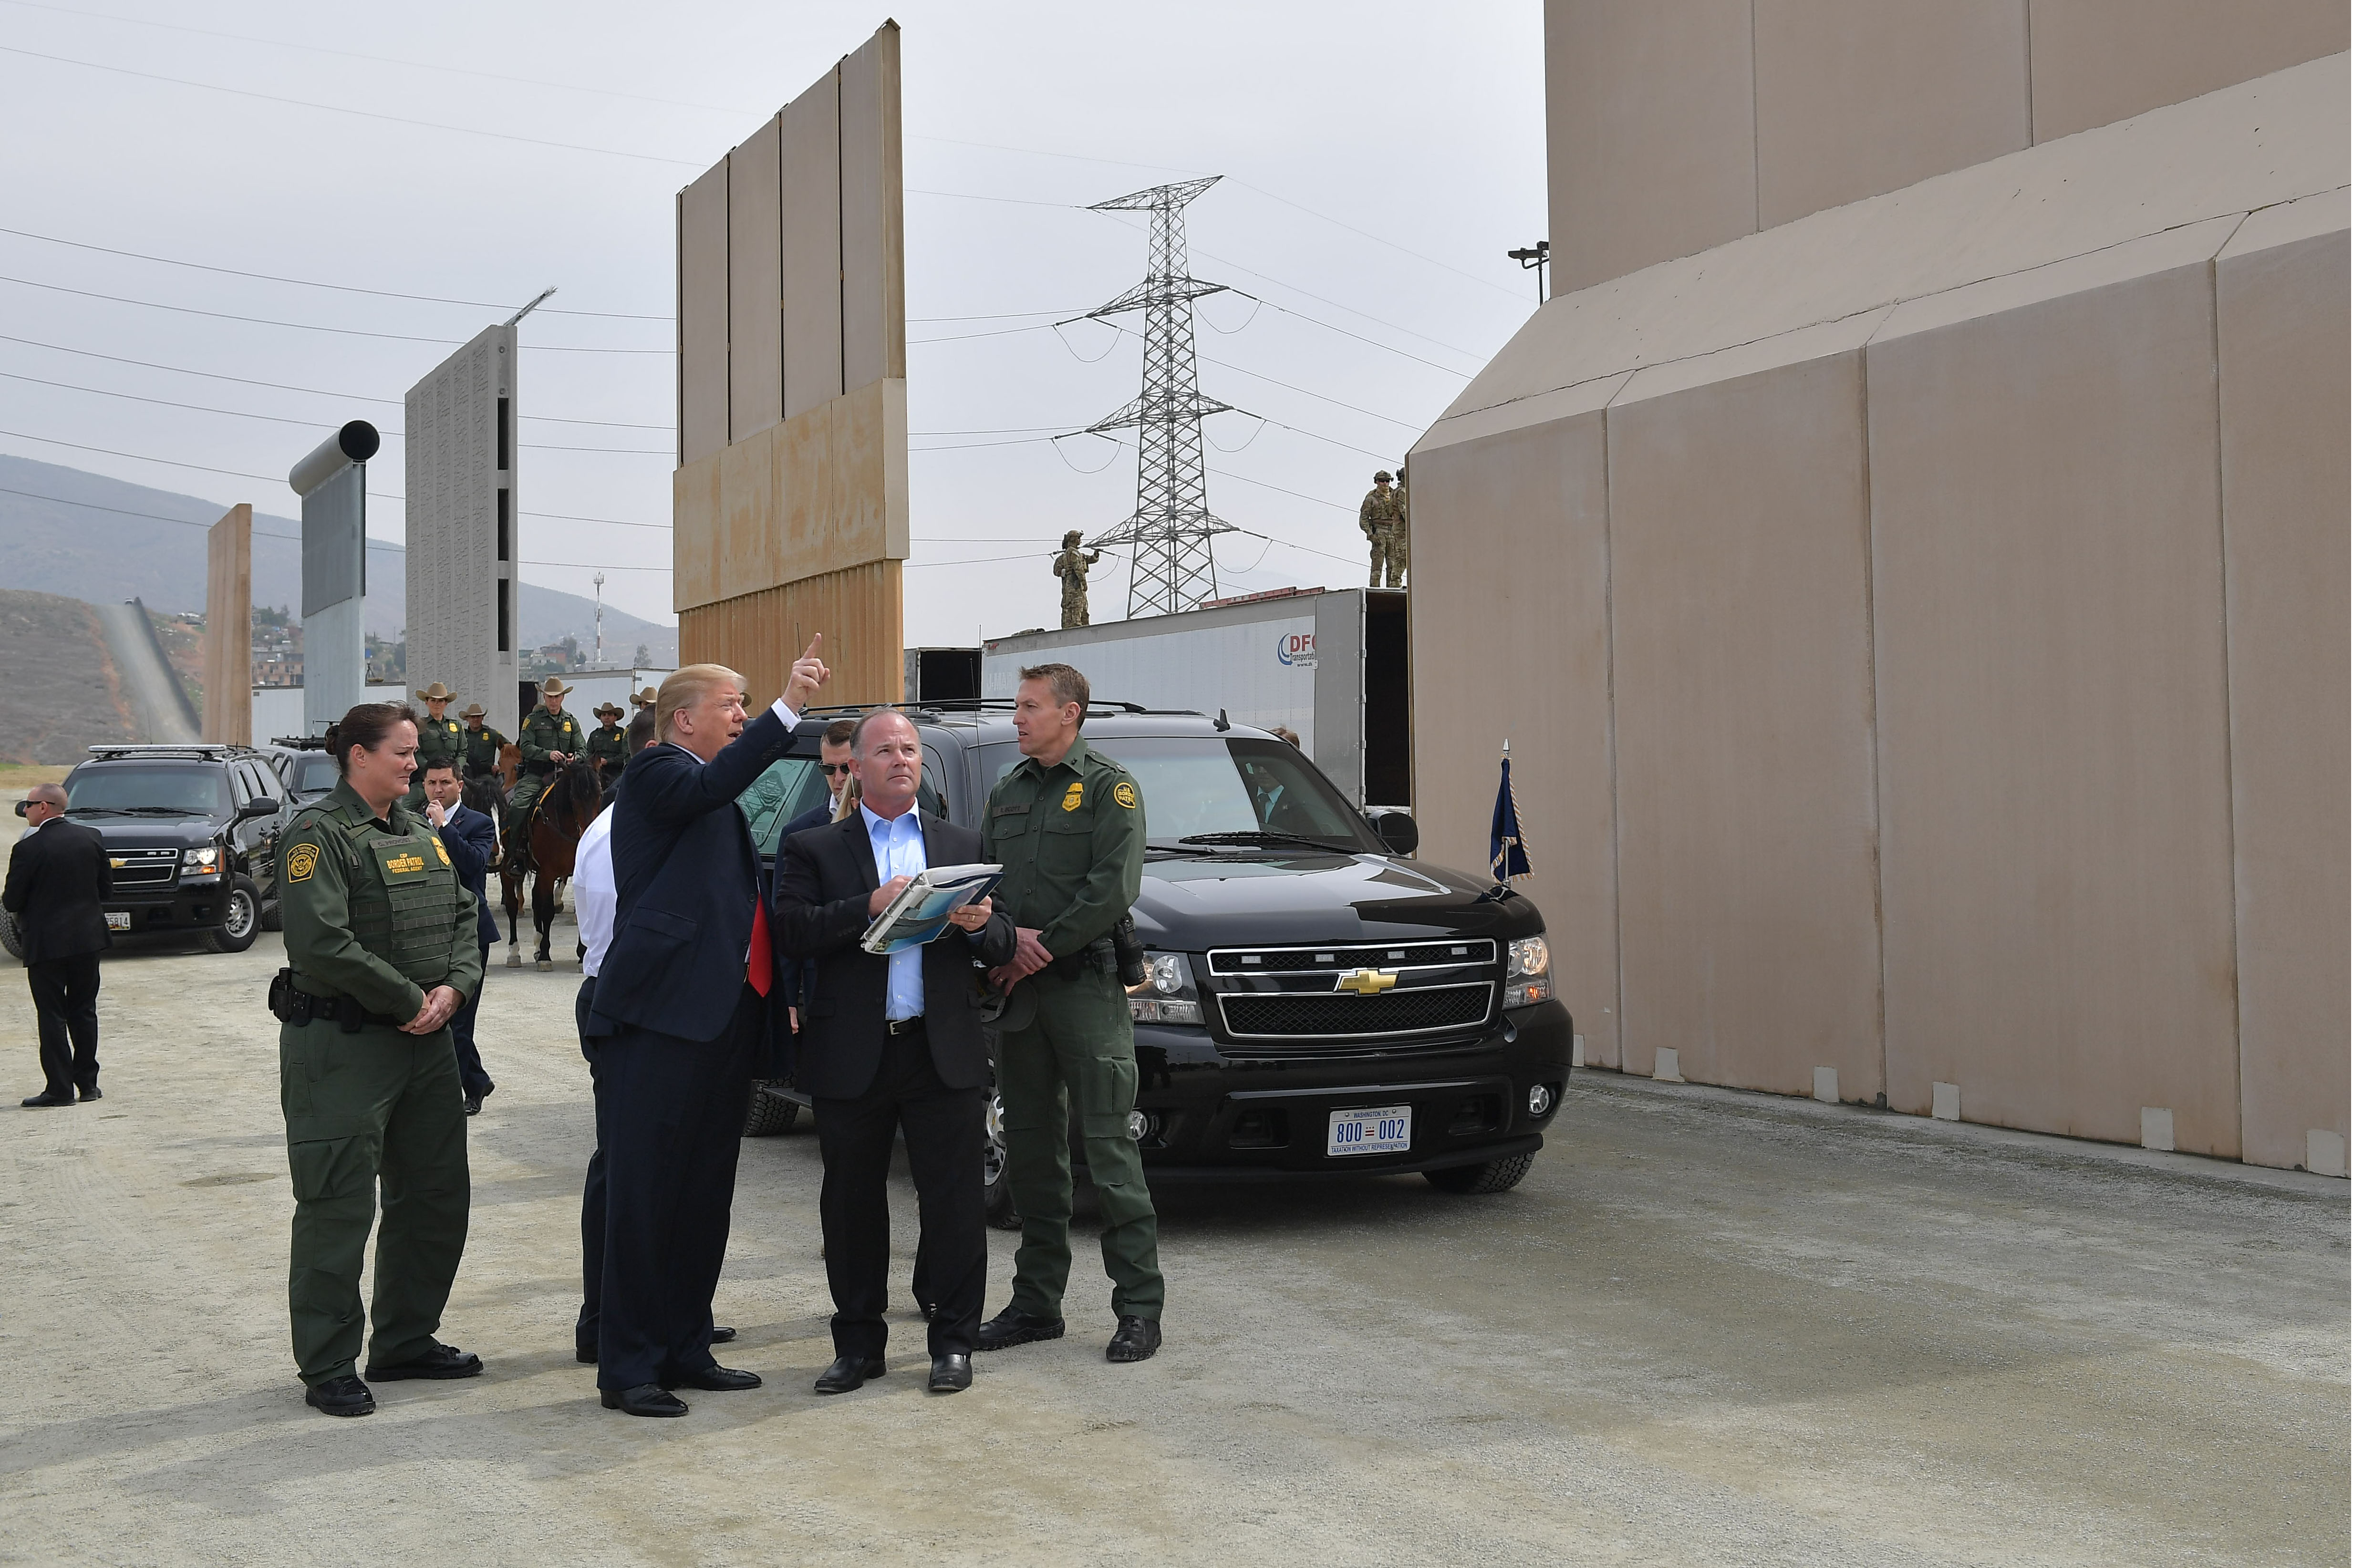 US President Donald Trump is shown border wall prototypes in San Diego, California on March 13, 2018. / AFP PHOTO / MANDEL NGAN (Photo credit should read MANDEL NGAN/AFP/Getty Images)